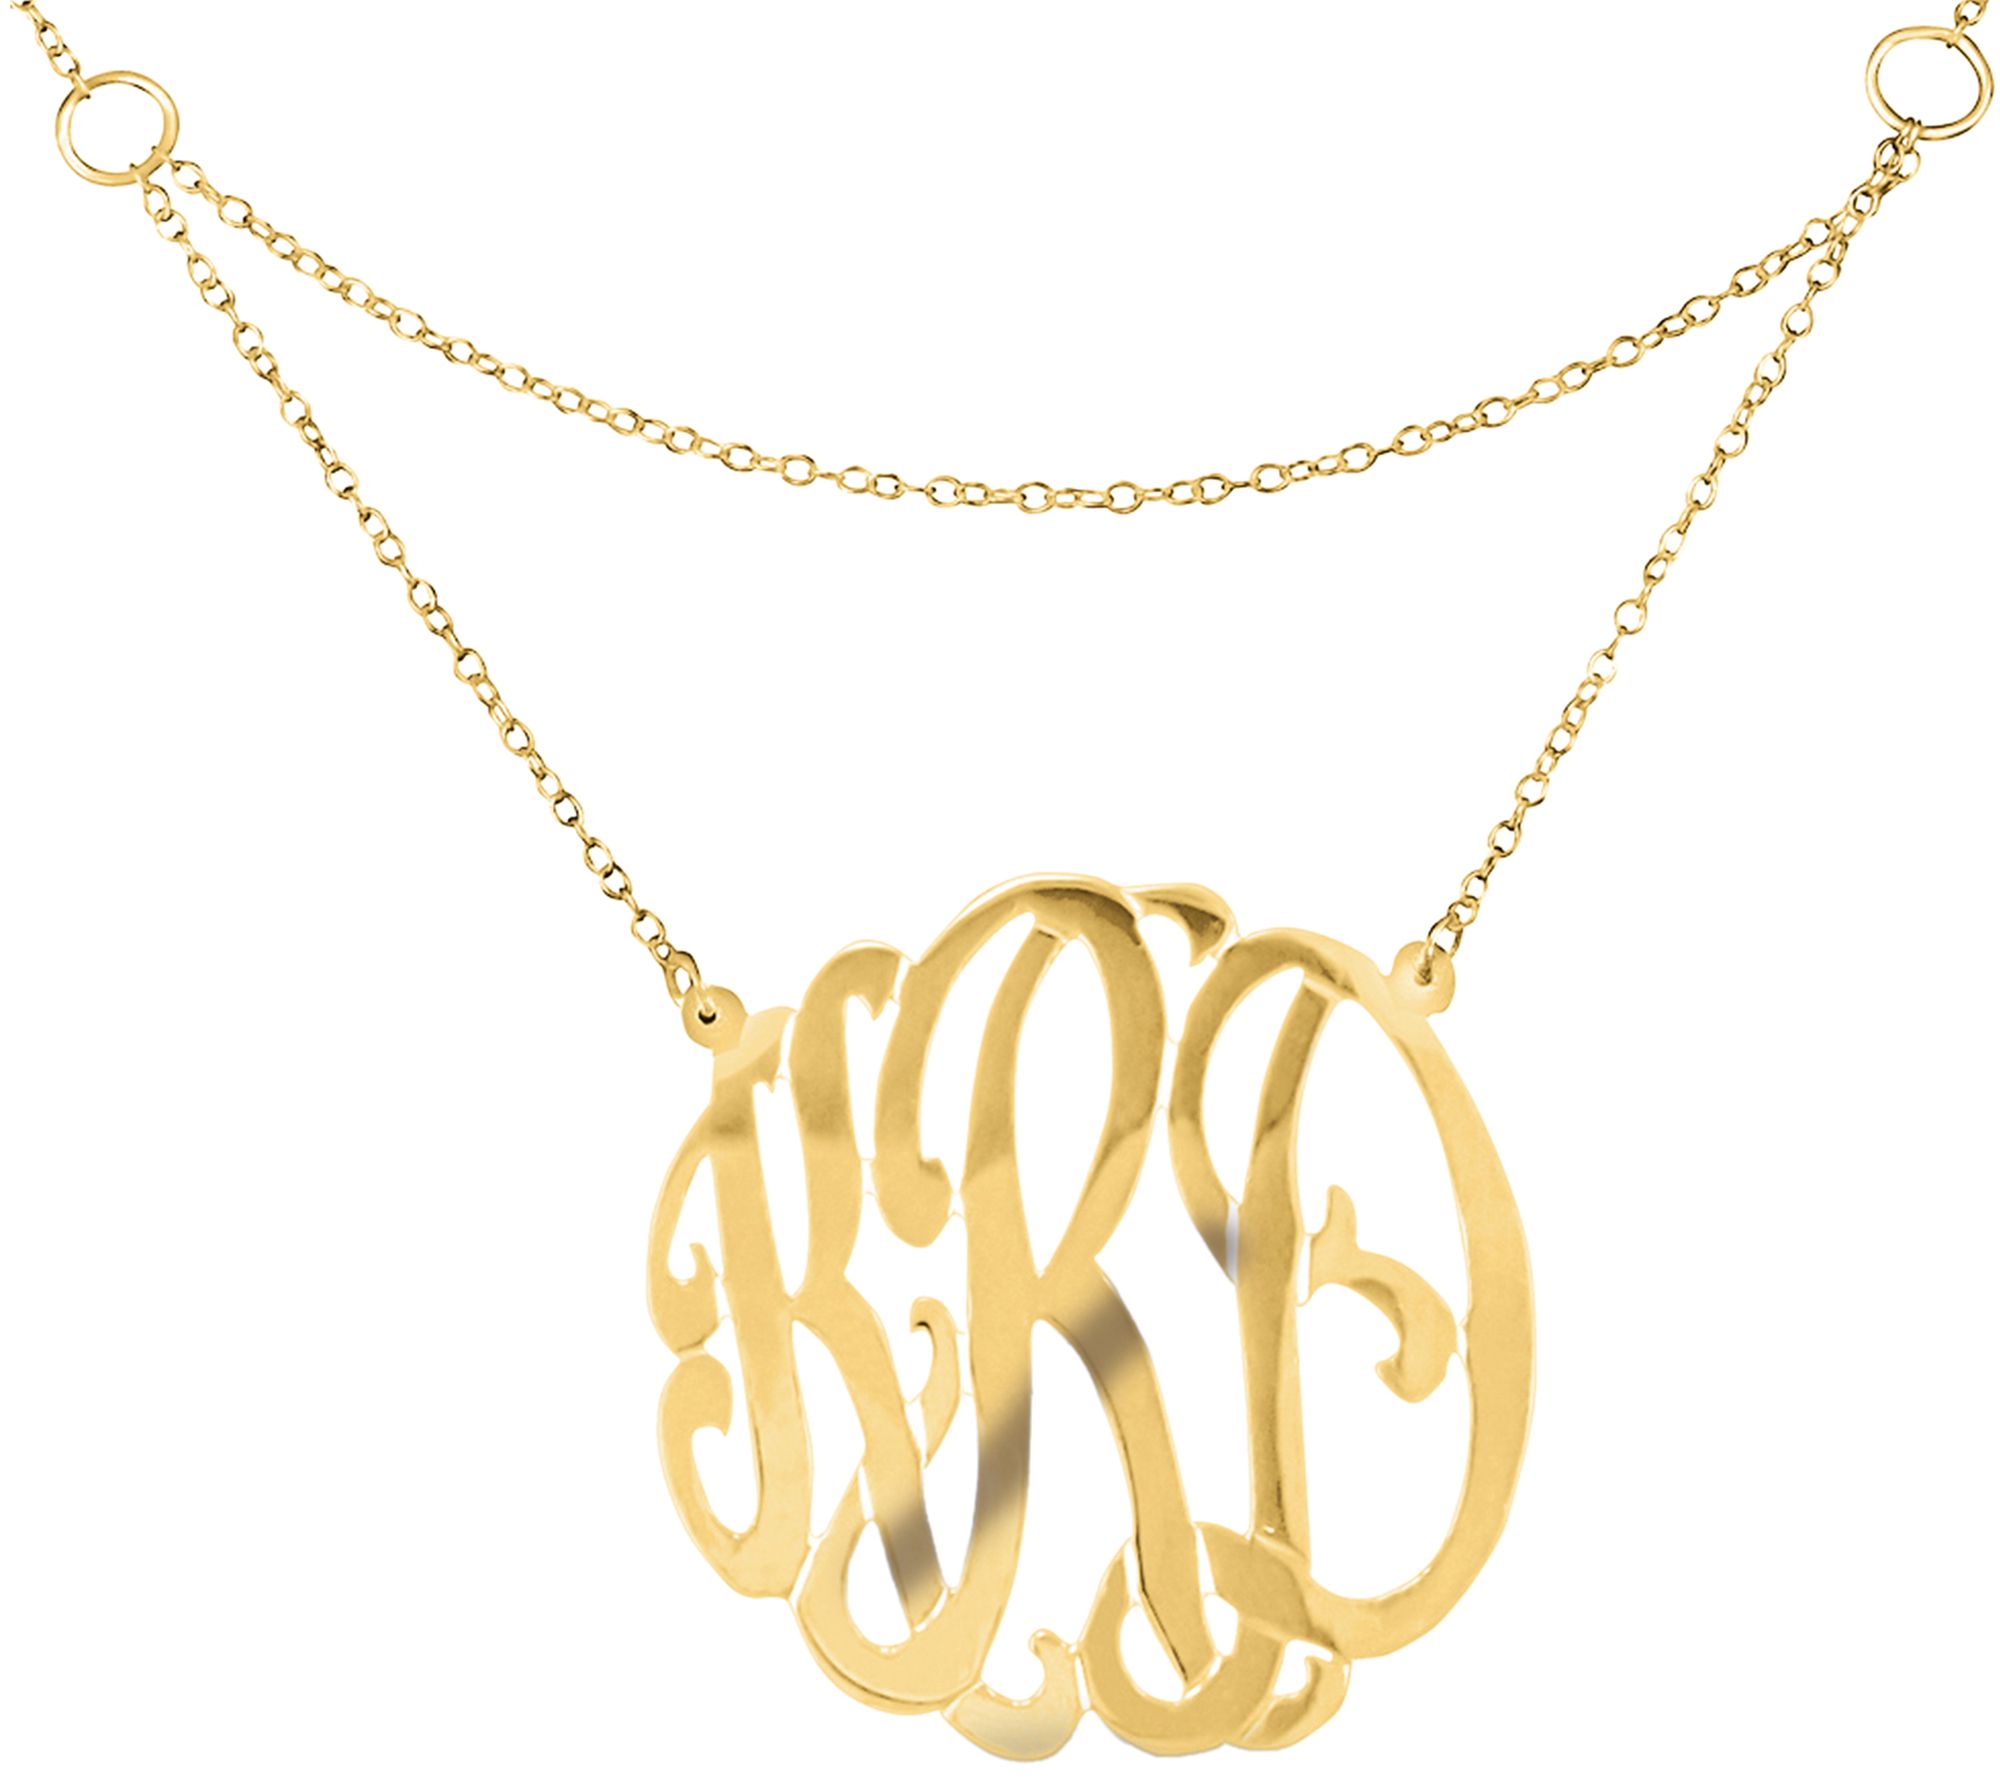 Personalized 24K Gold-Plated Sterling Gated Monogram Necklace - QVC.com